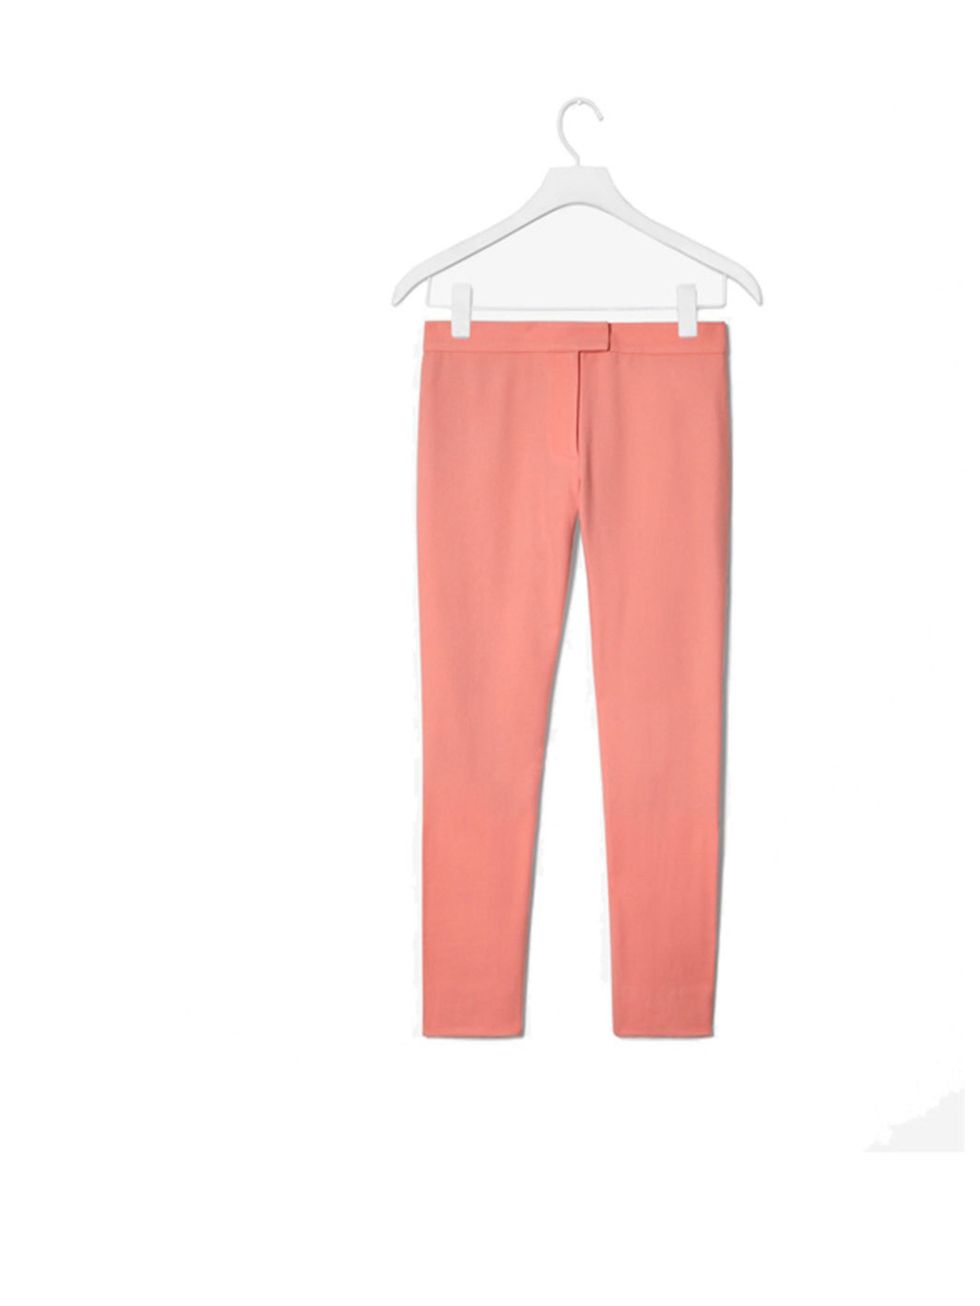 <p>Cos wool trousers, £89, <a href="http://www.cosstores.com/Store/Women/New/Wool_cropped_trousers/365246-930515.1">cosstores.com</a></p>